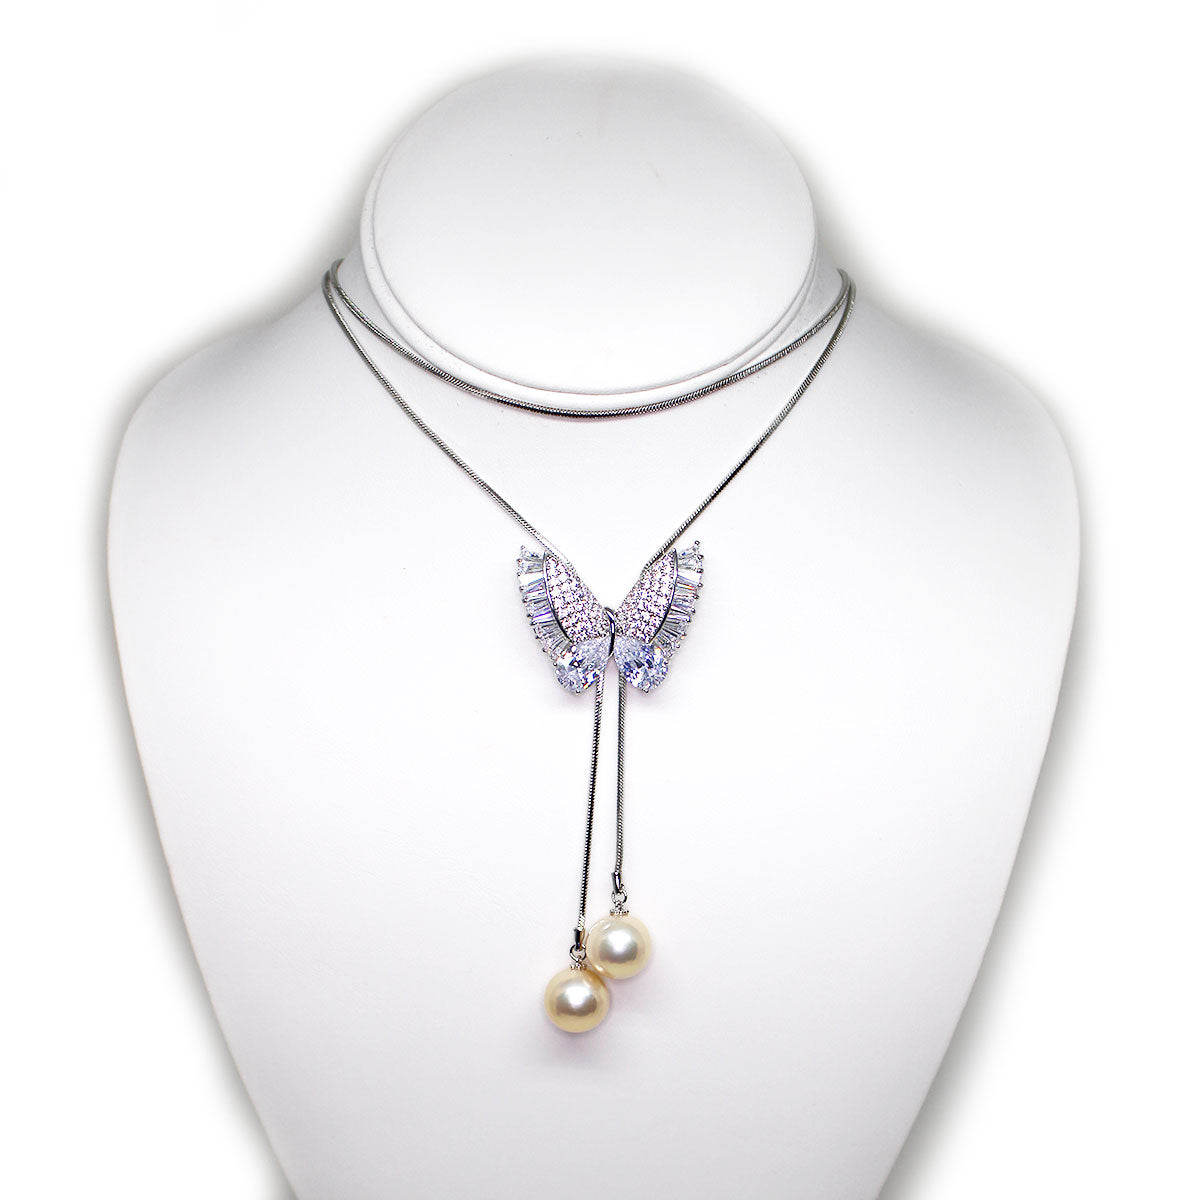 Shining Butterfly Double Edison Pearls 36 Inches Adjustable Necklace - Timeless Pearl